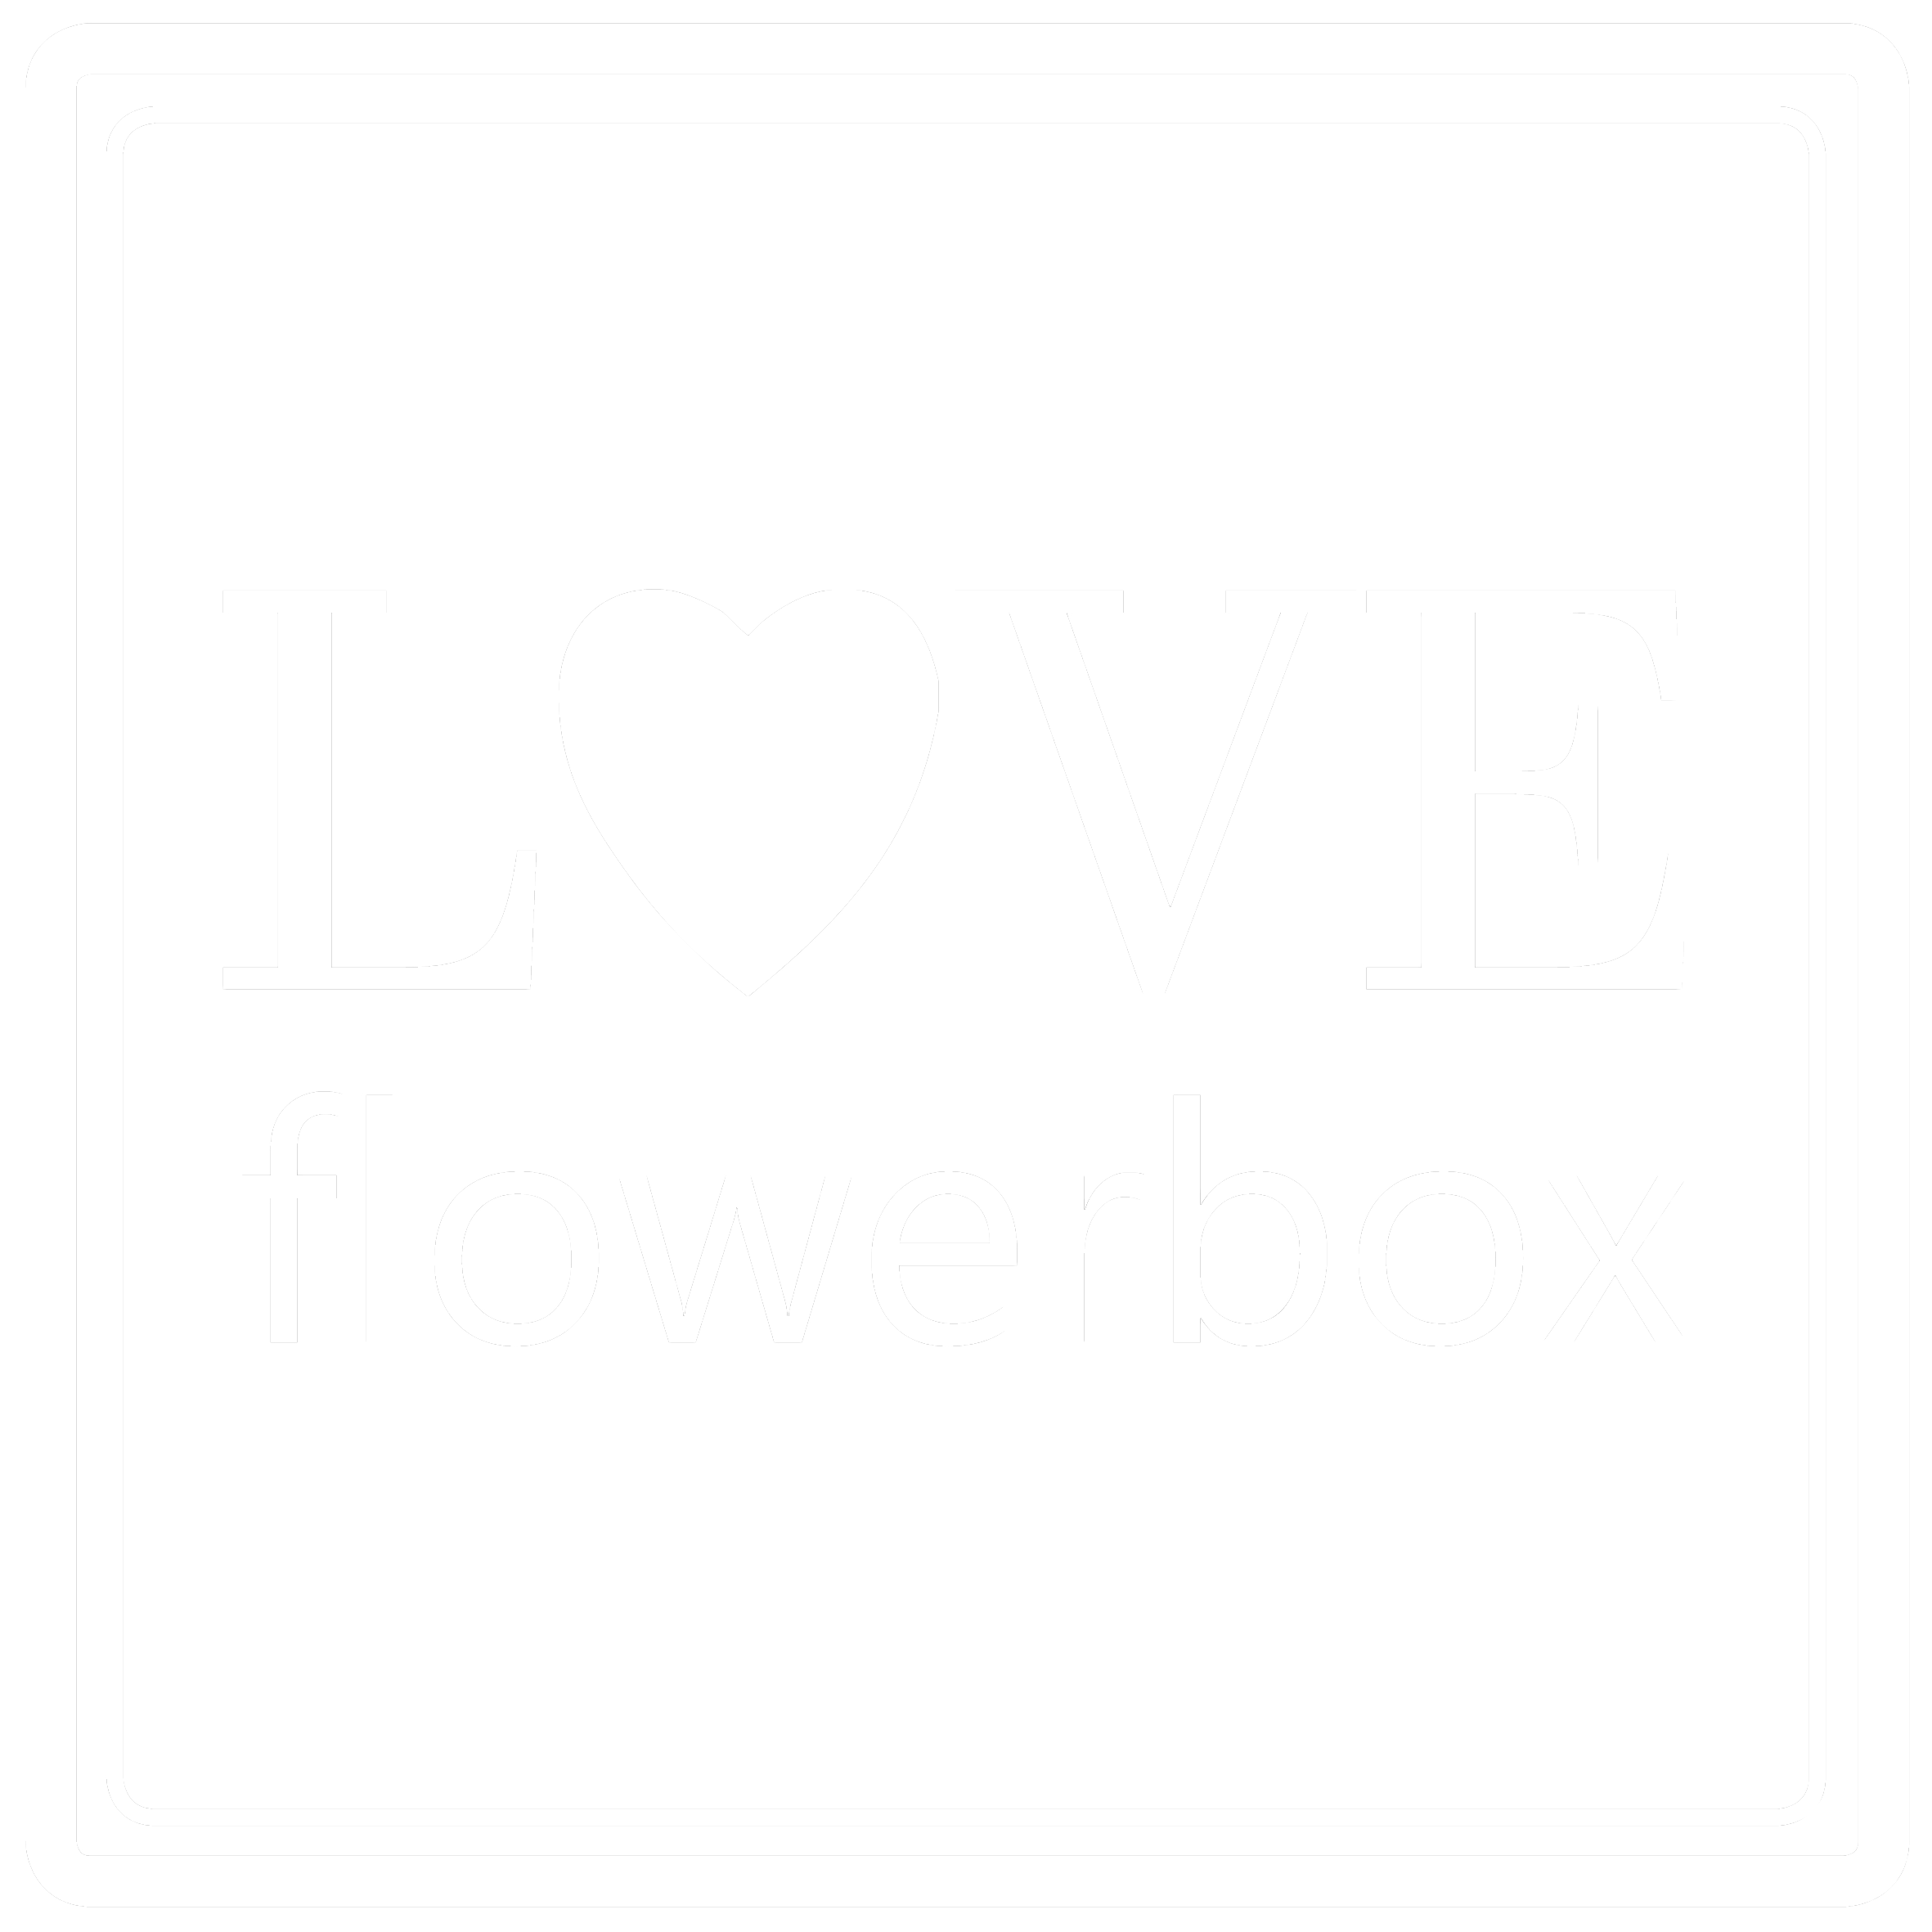 Love Flowerbox Coupons & Promo Codes